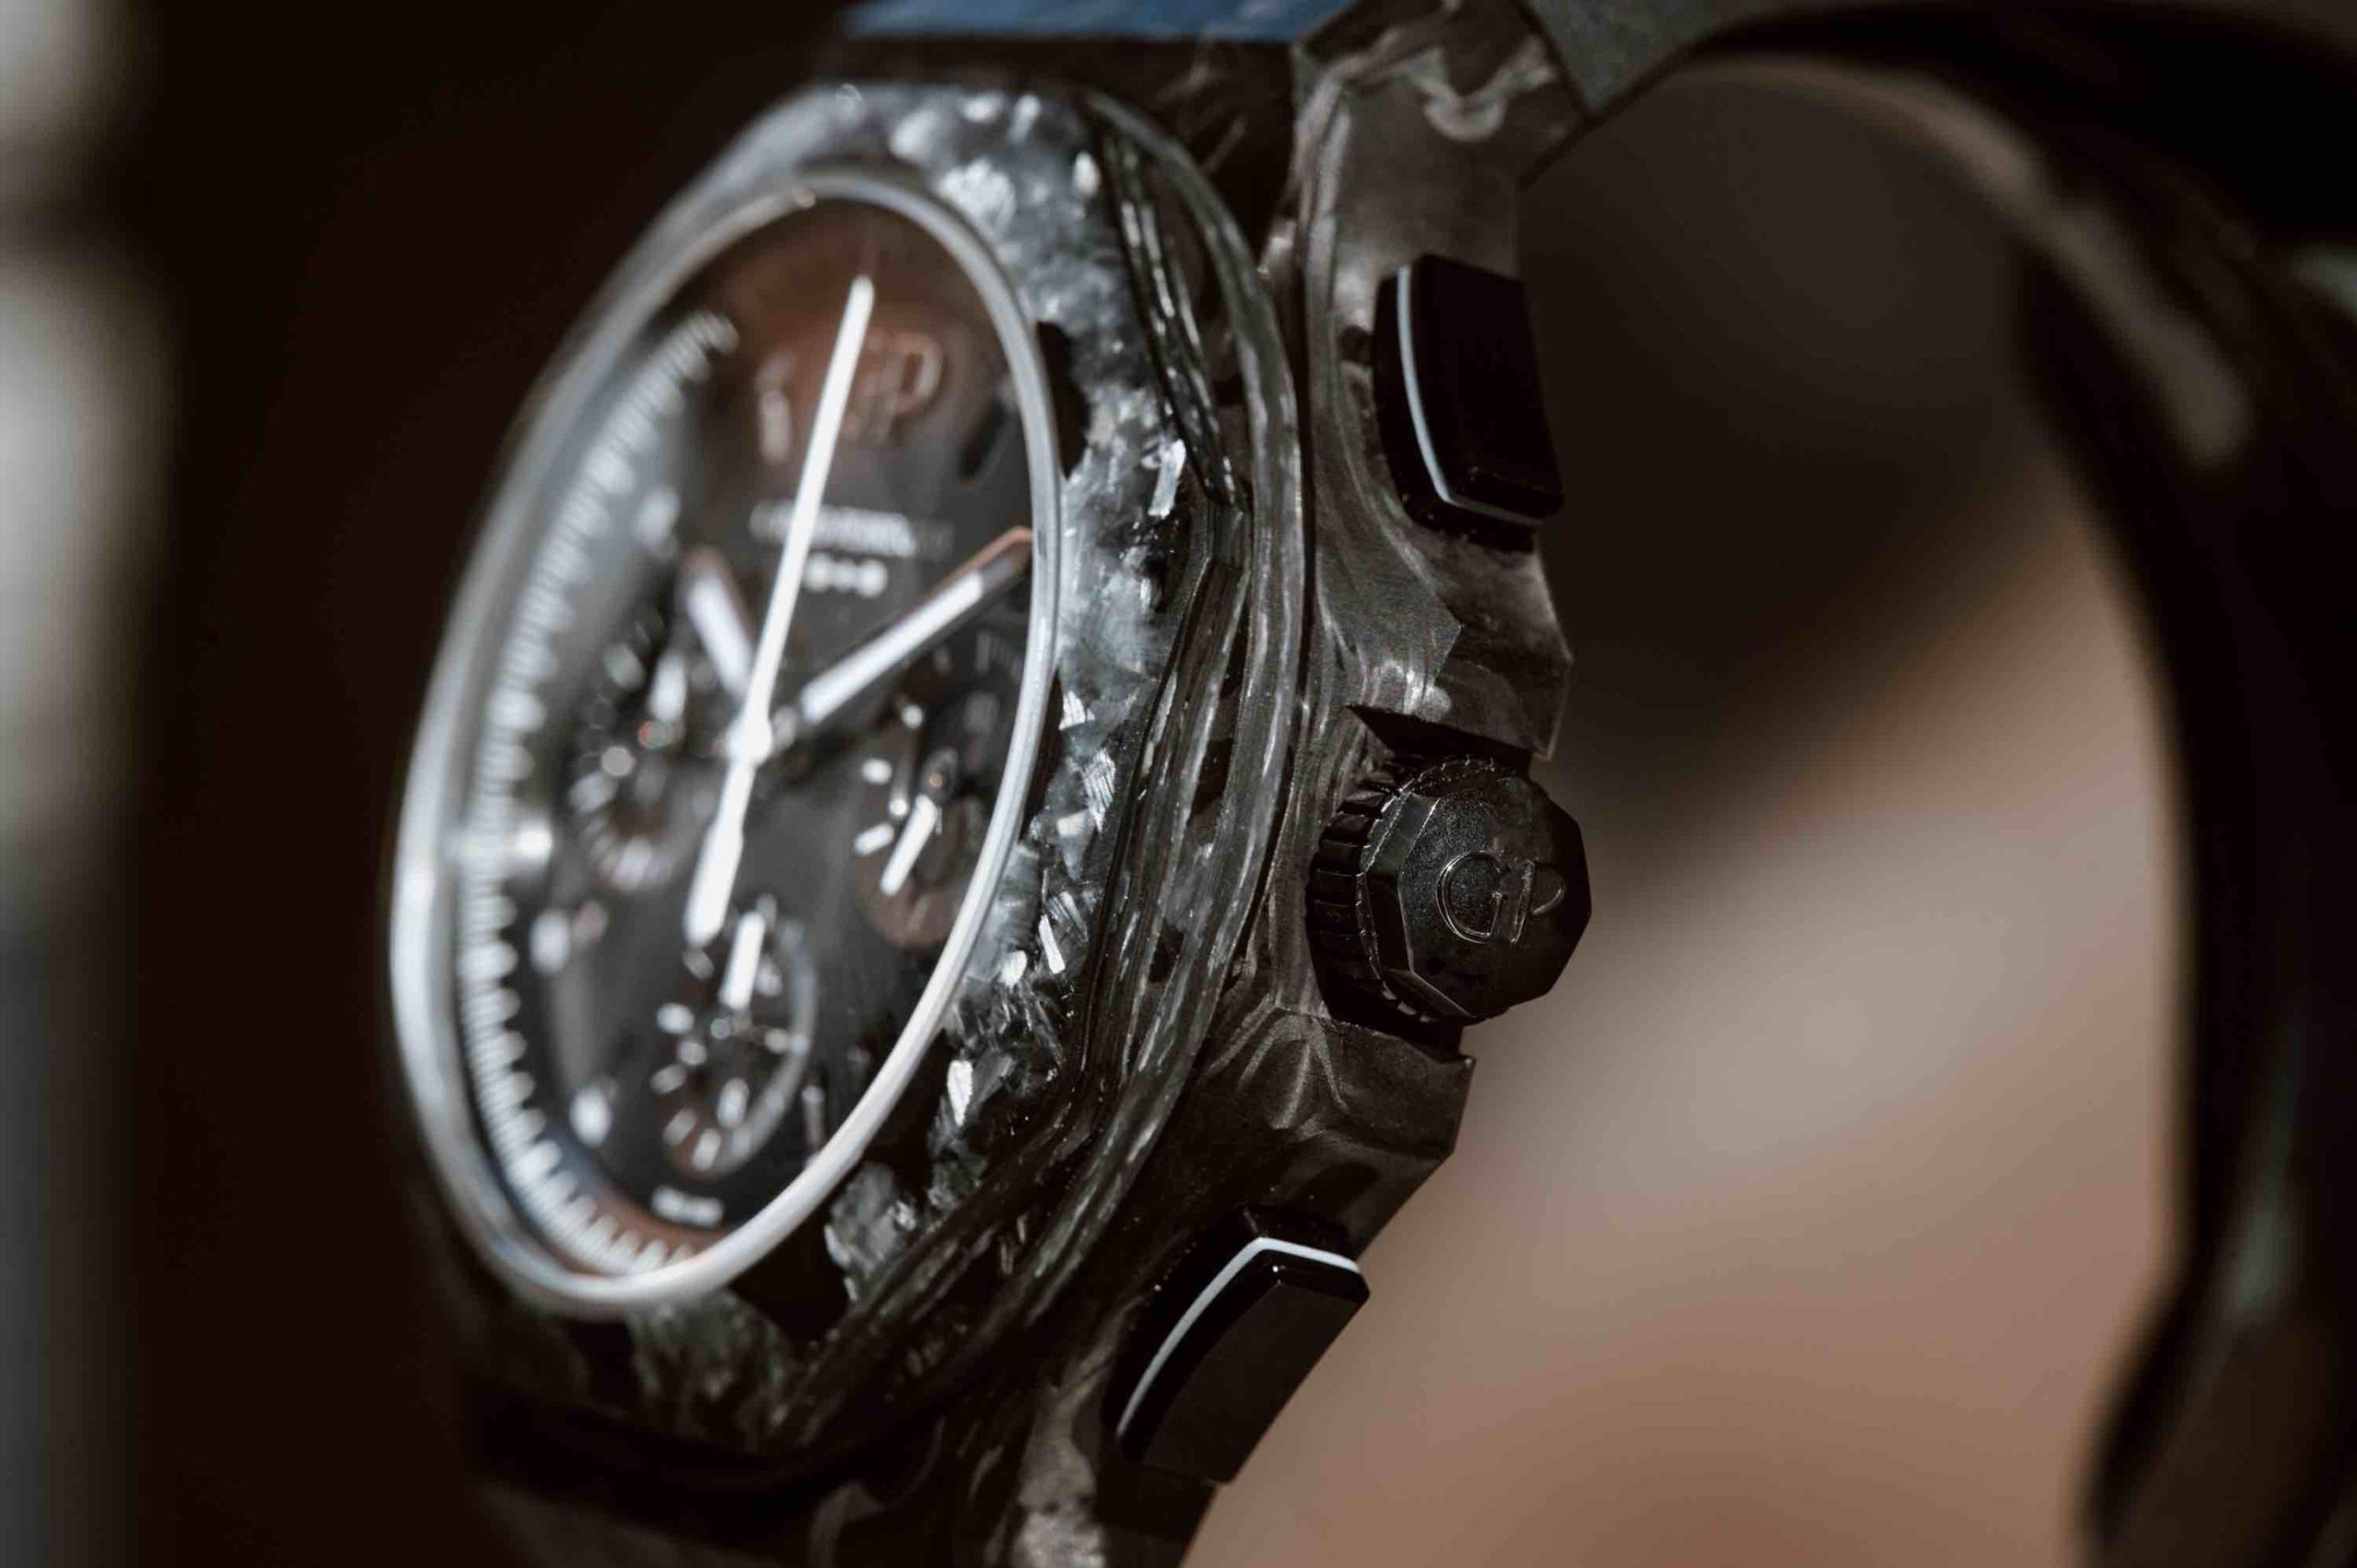 Introducing the Laureato Absolute Crystal Rock by Girard-Perregaux